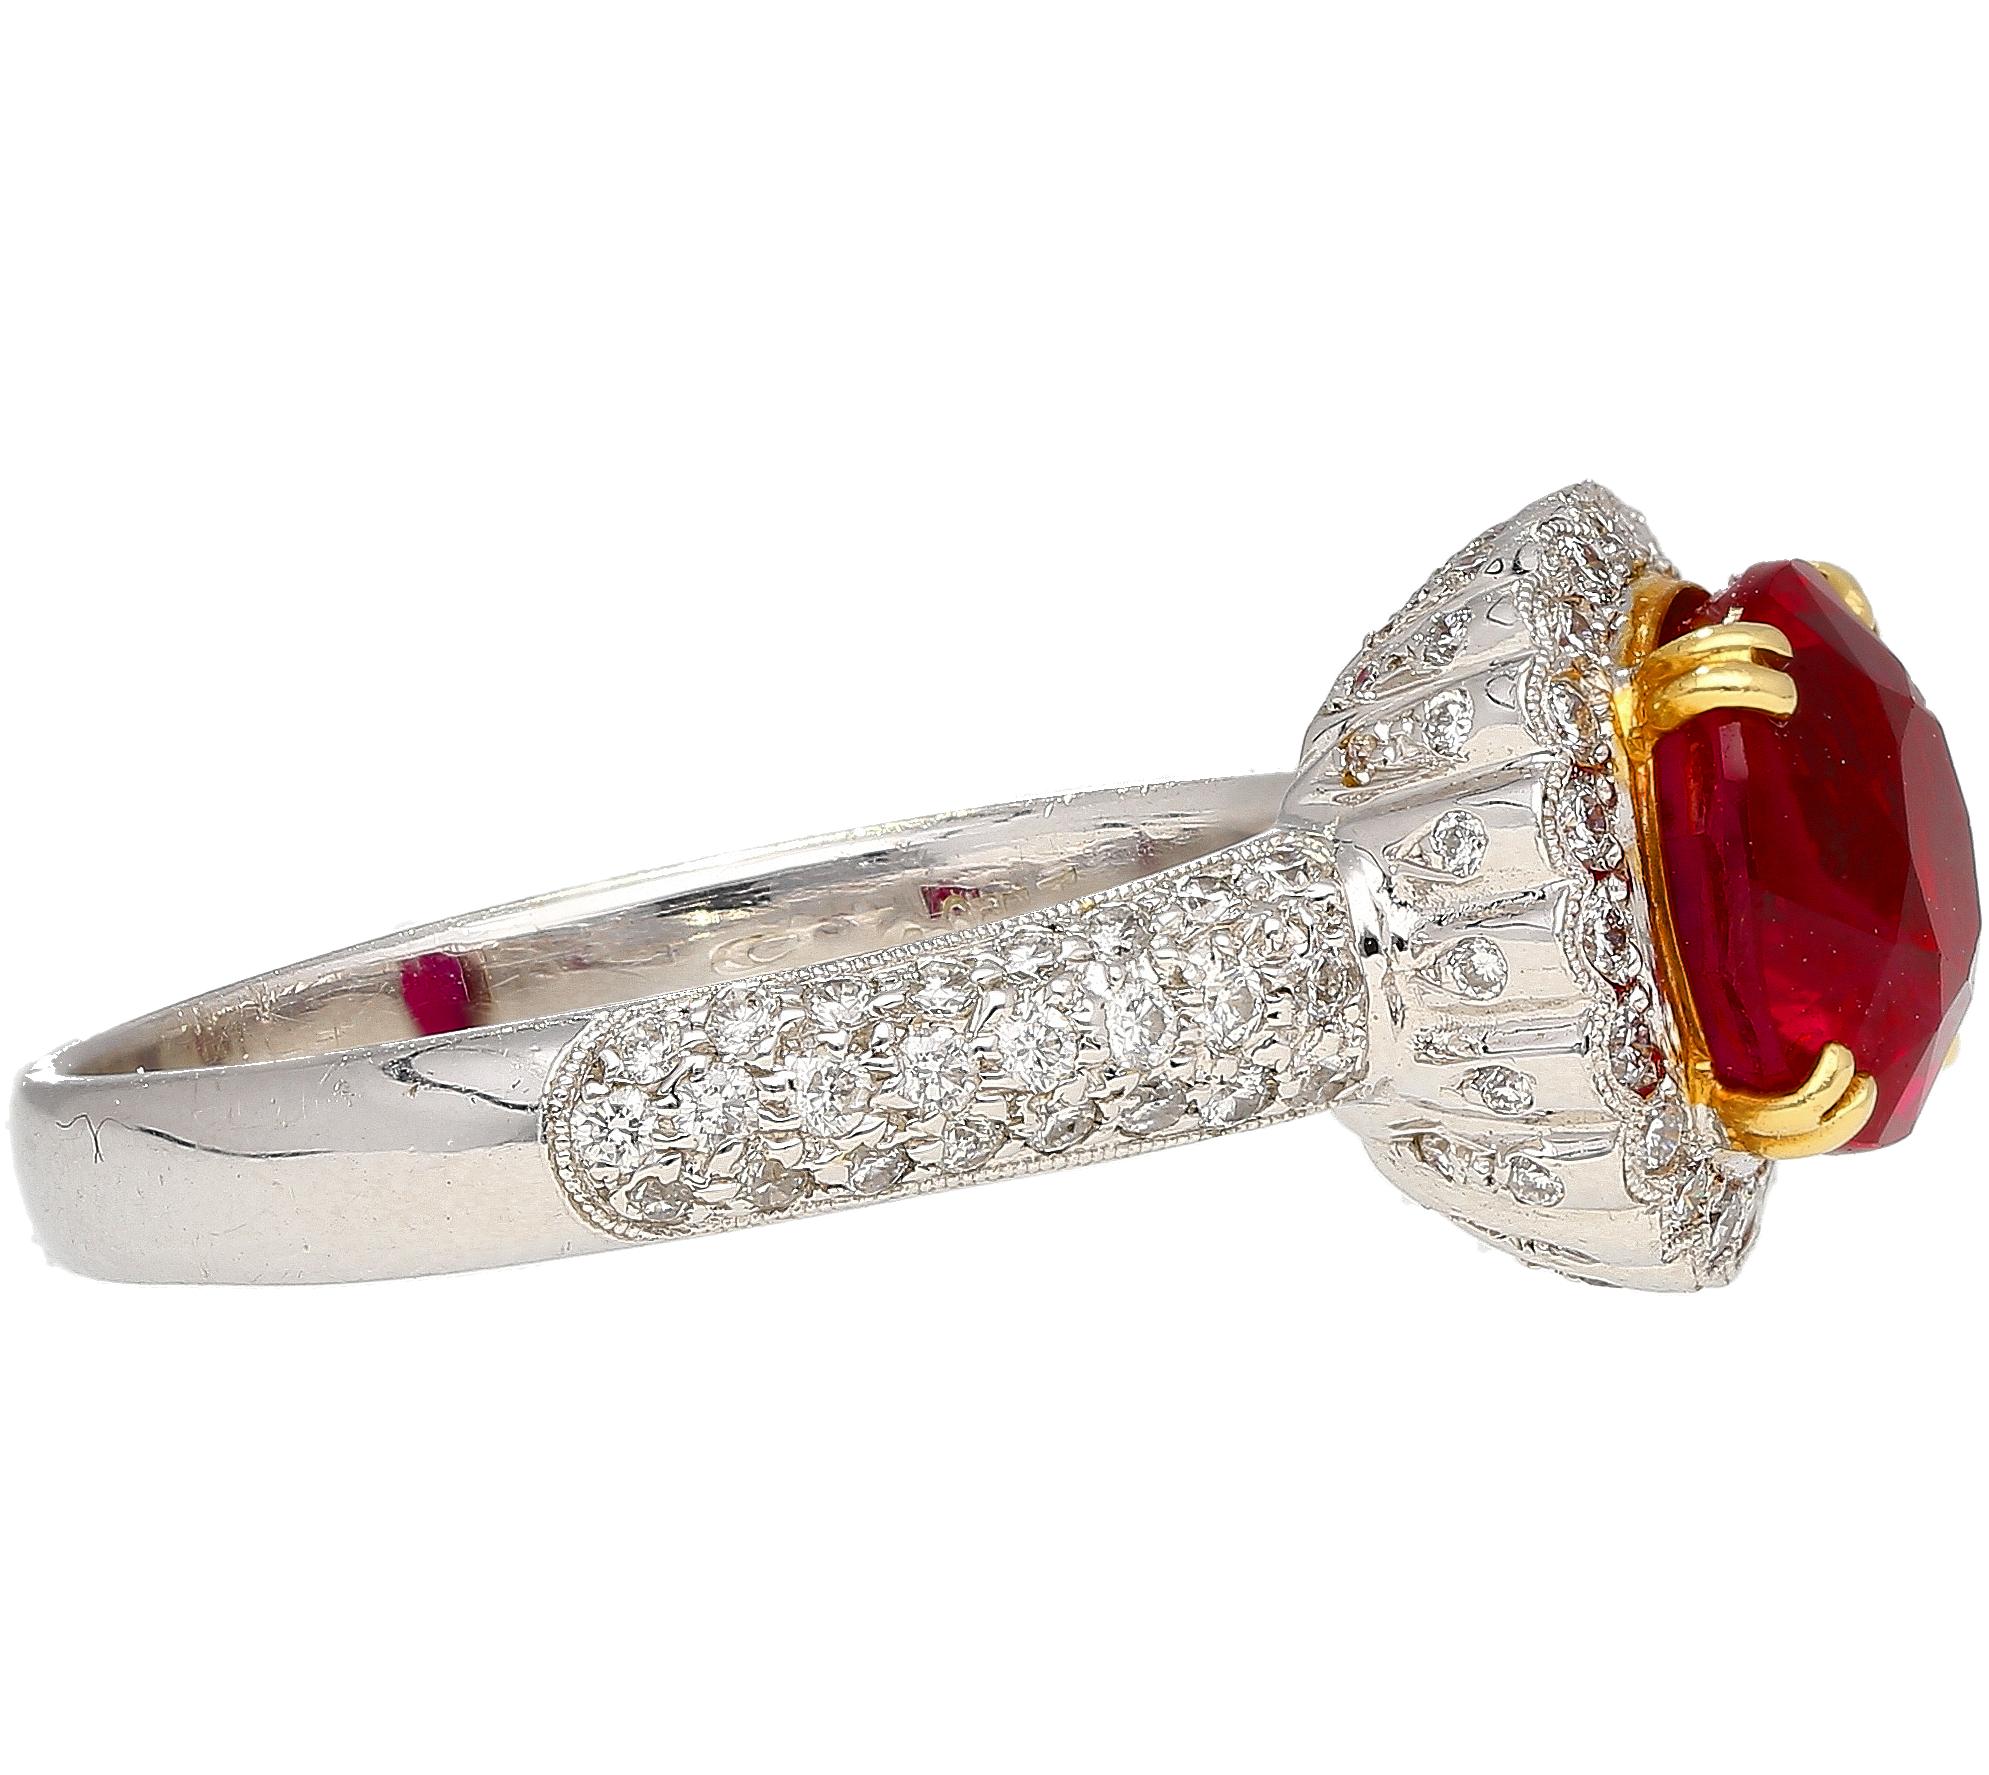 3.02 Carat Cushion Cut Burma Ruby & Round Diamond Ring in Platinum & 18K Gold In New Condition For Sale In Miami, FL